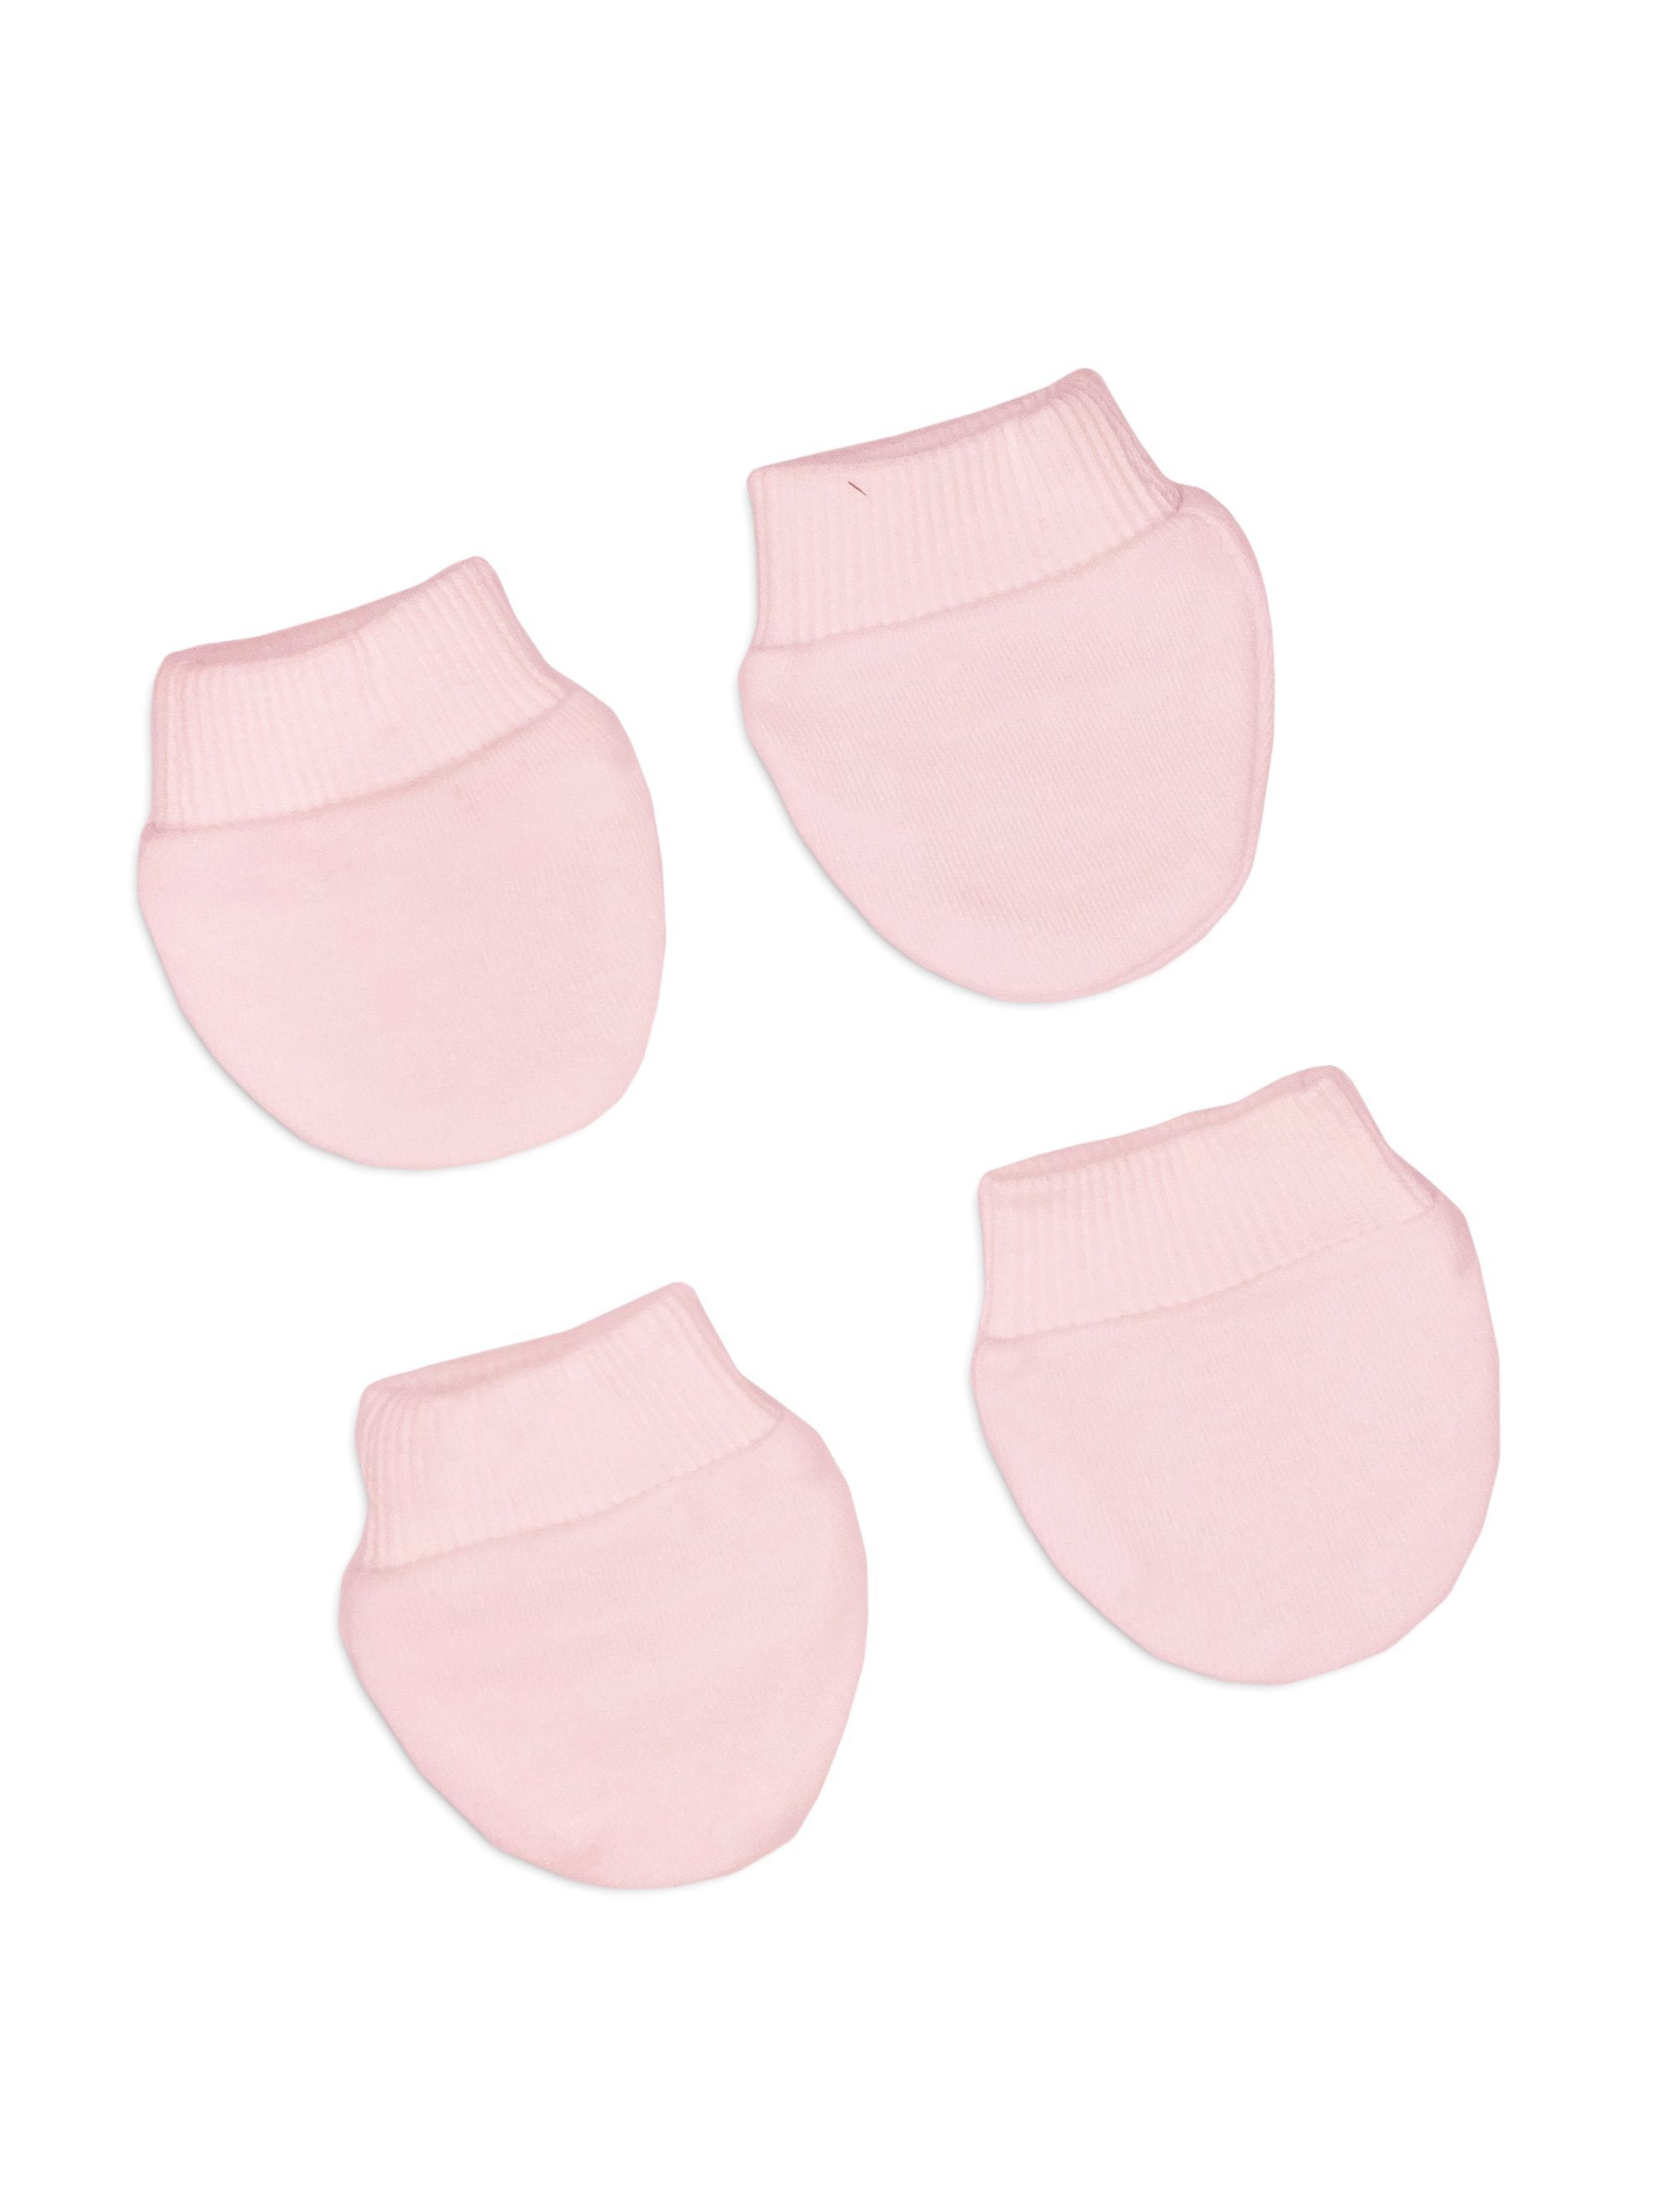 2 Pack Premature Baby Scratch Mitts - Pink Scratch Mitts Tiny Baby 